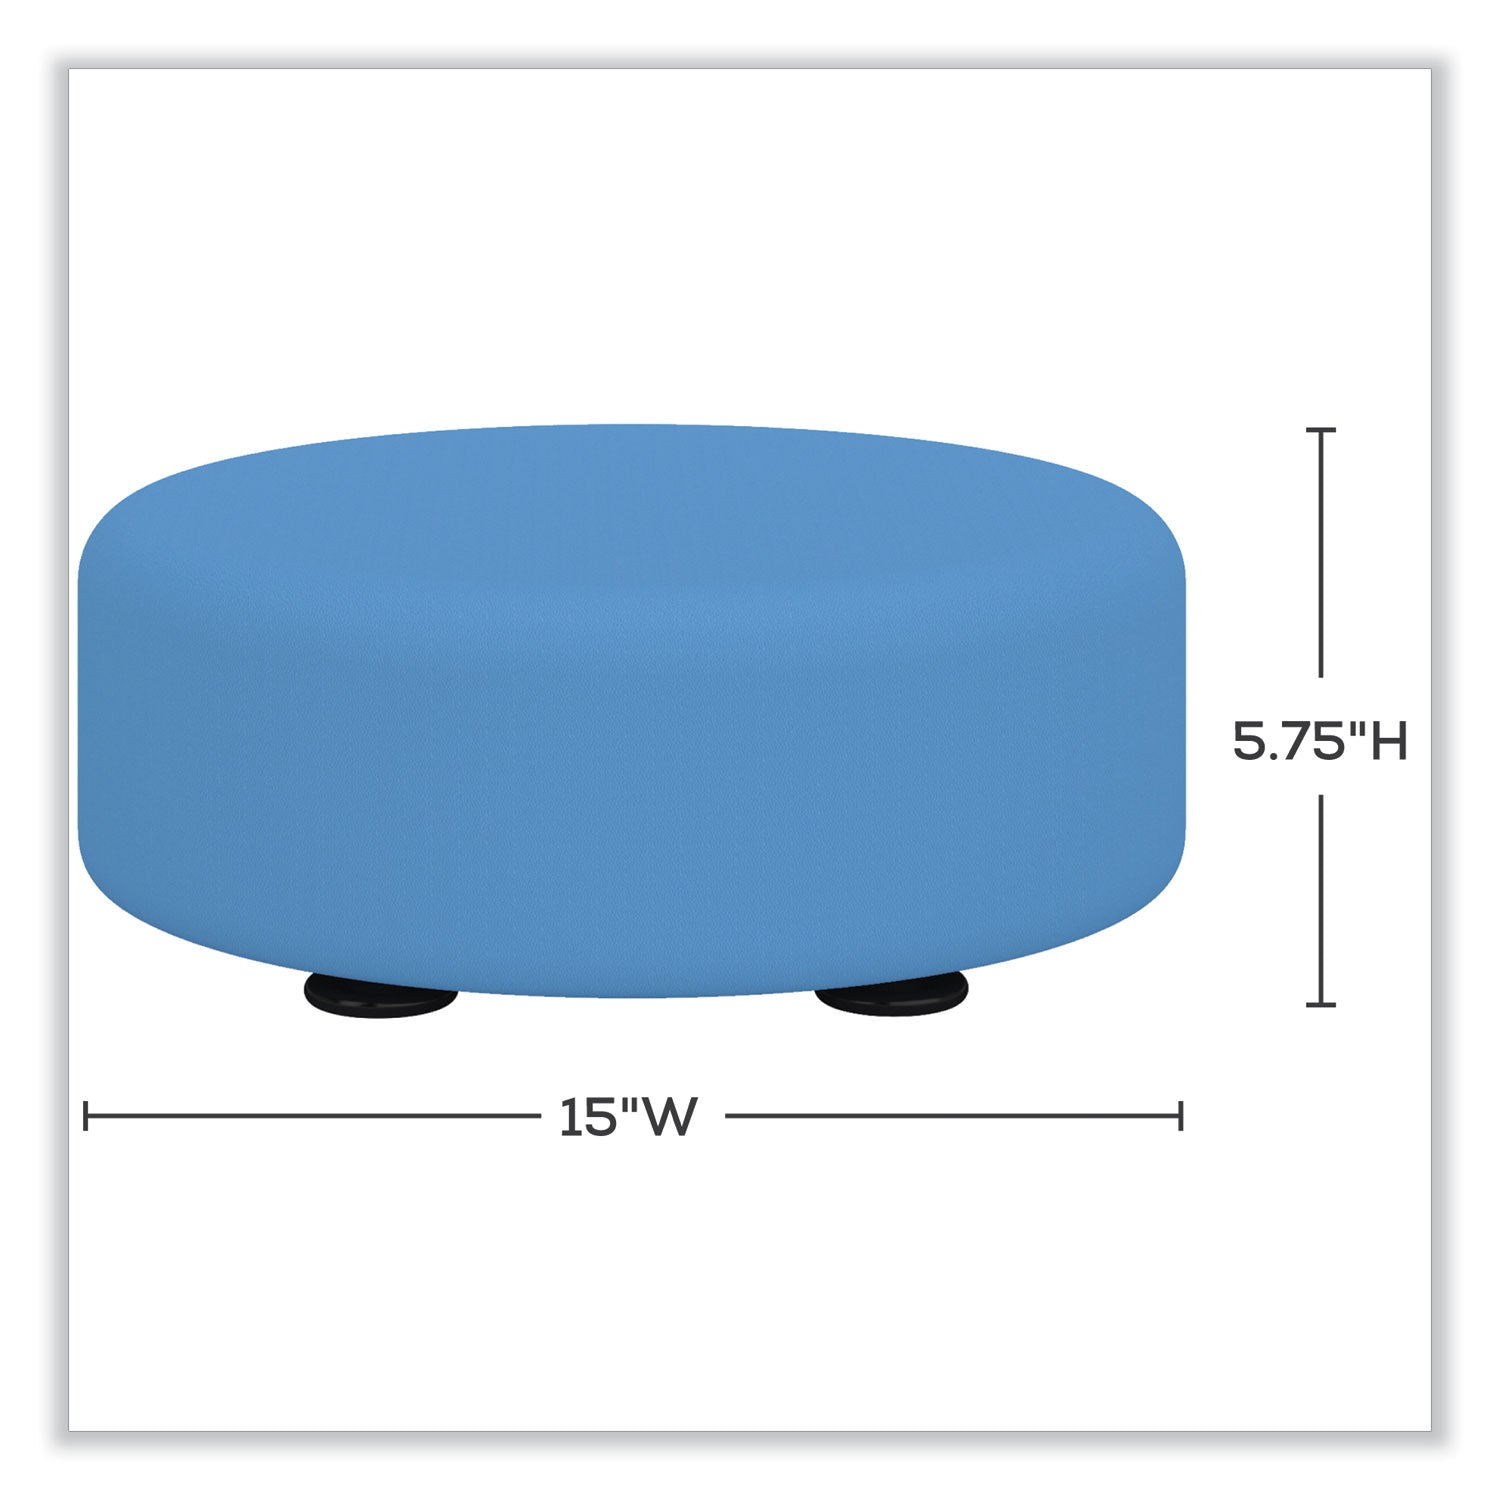 learn-15-round-vinyl-floor-seat-15-dia-x-575h-baby-blue-ships-in-1-3-business-days_saf8121buv - 2